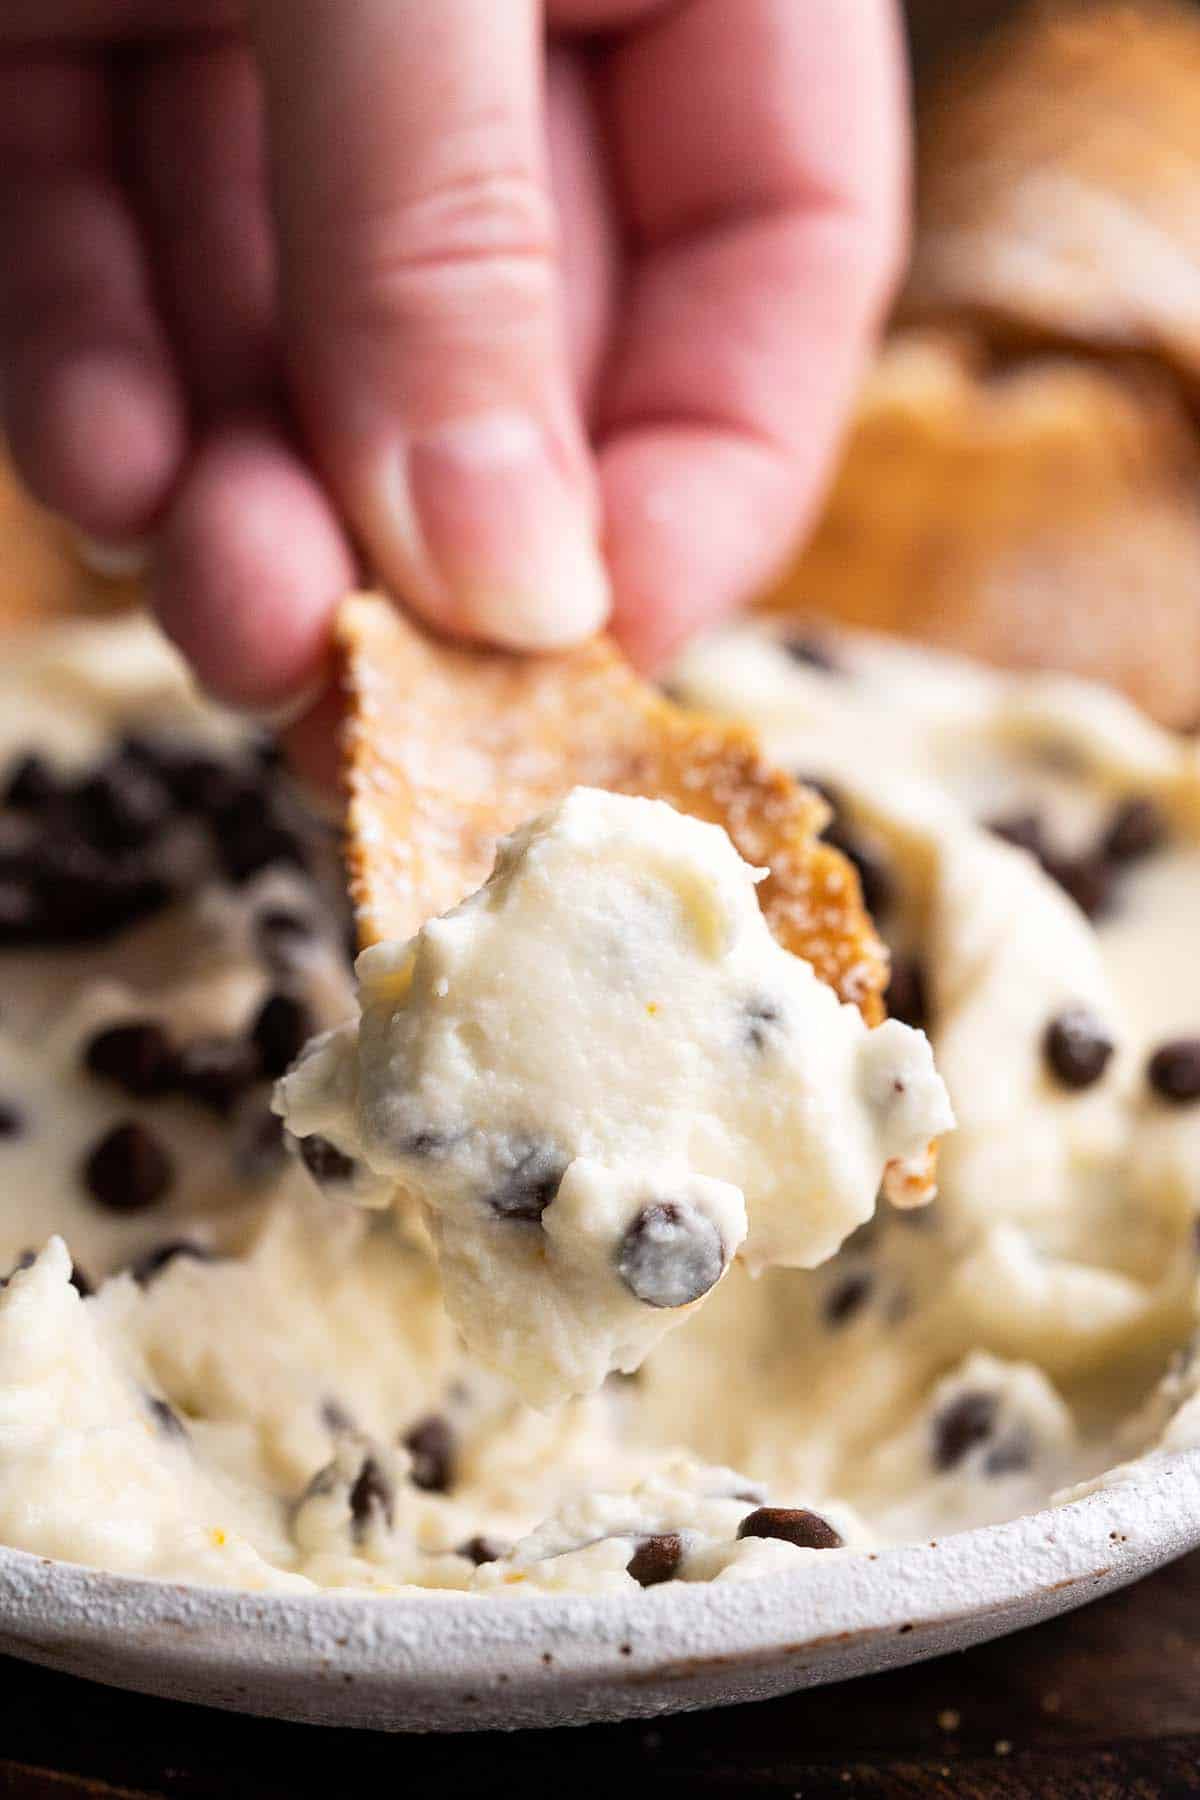 hand dipping chip into homemade cannoli dip